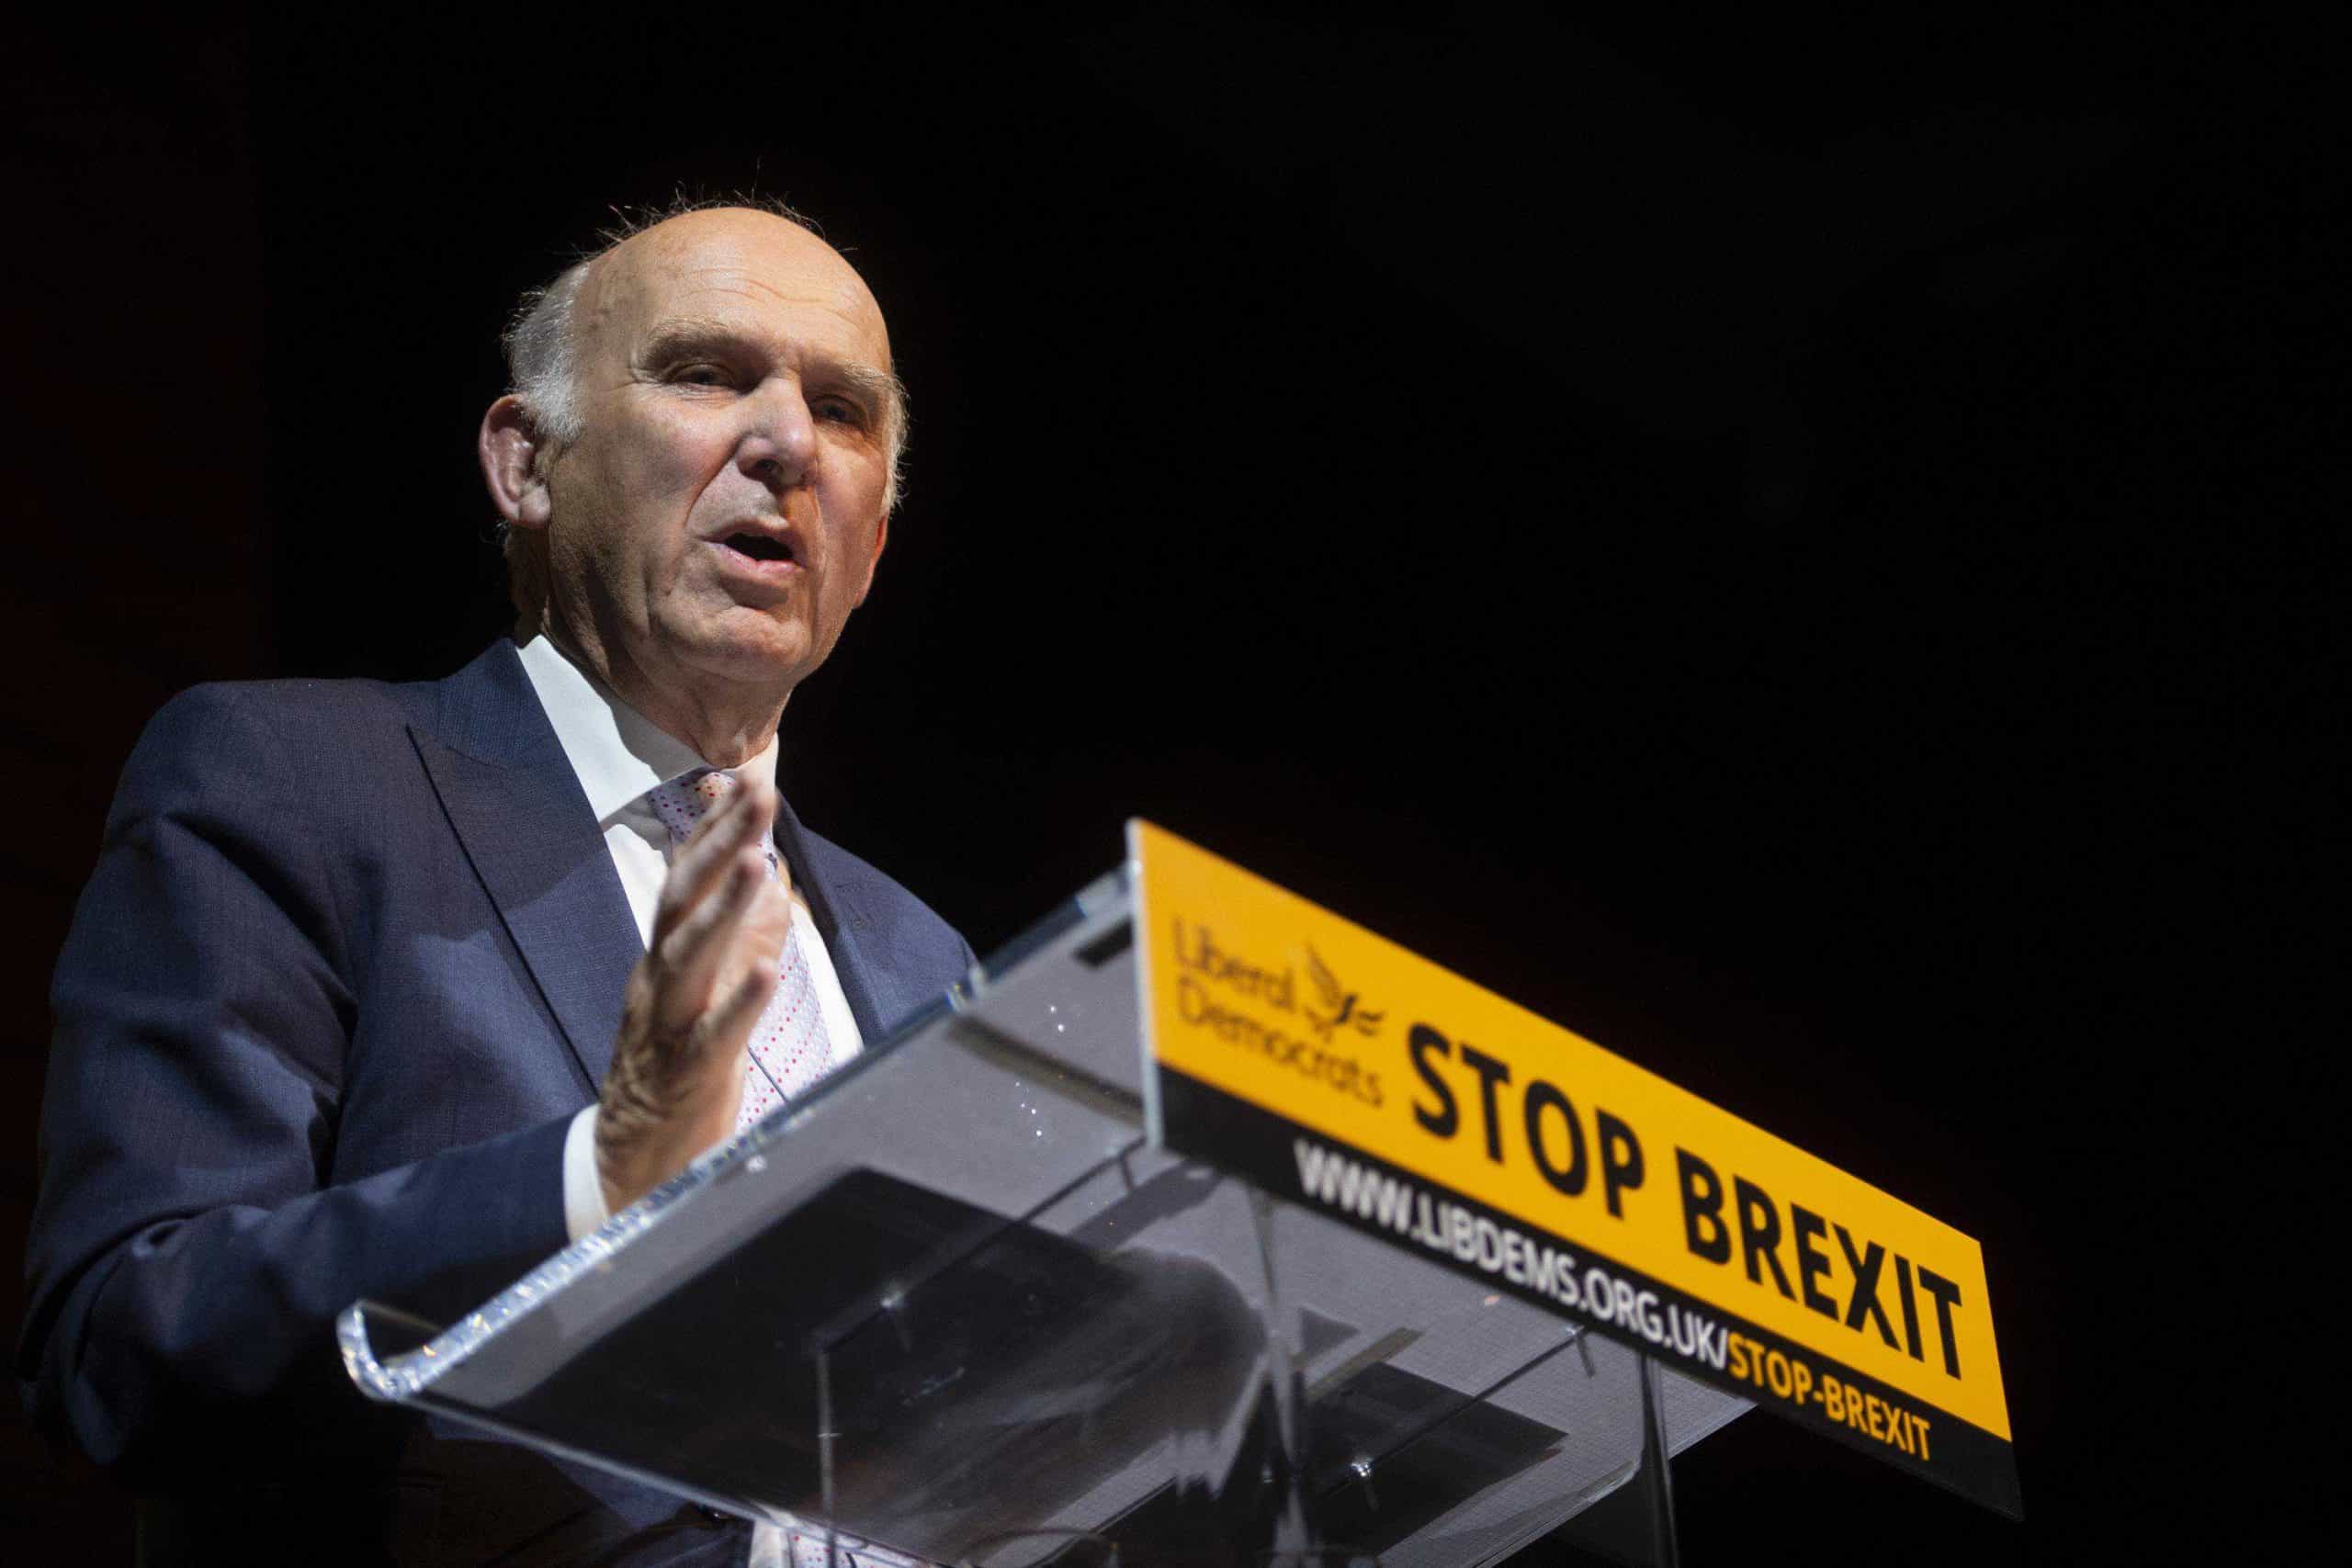 Hung parliament, referendum and another General Election ahead – Sir Vince Cable